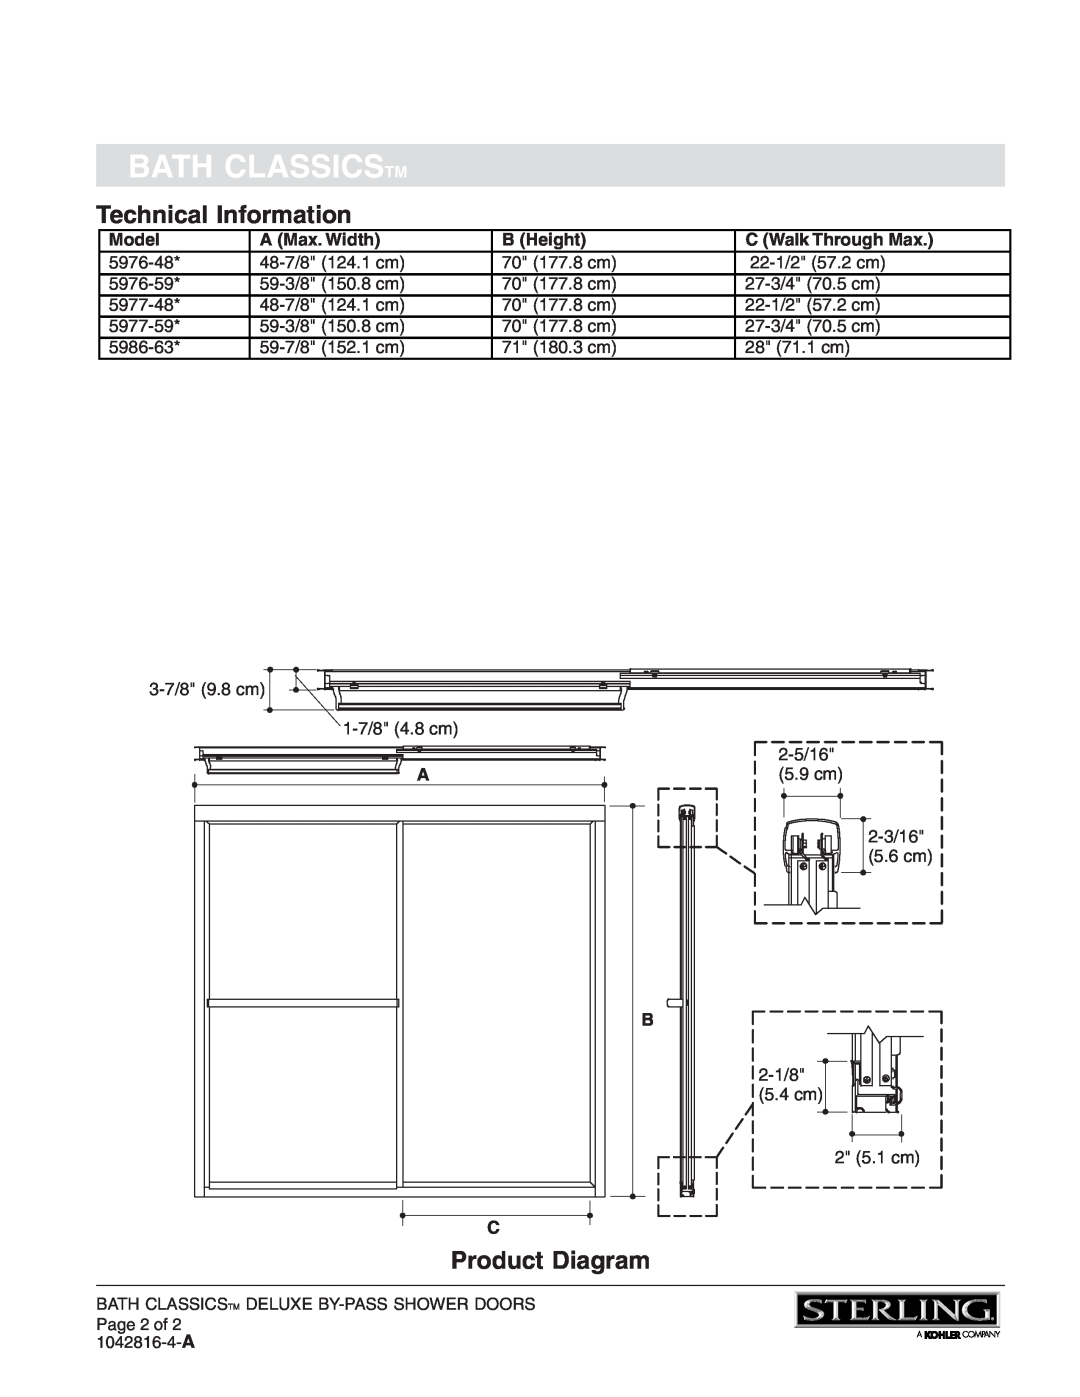 Sterling Plumbing 5986, 5977, 5976 Technical Information, Product Diagram, Bath Classicstm, Model, A Max. Width, B Height 